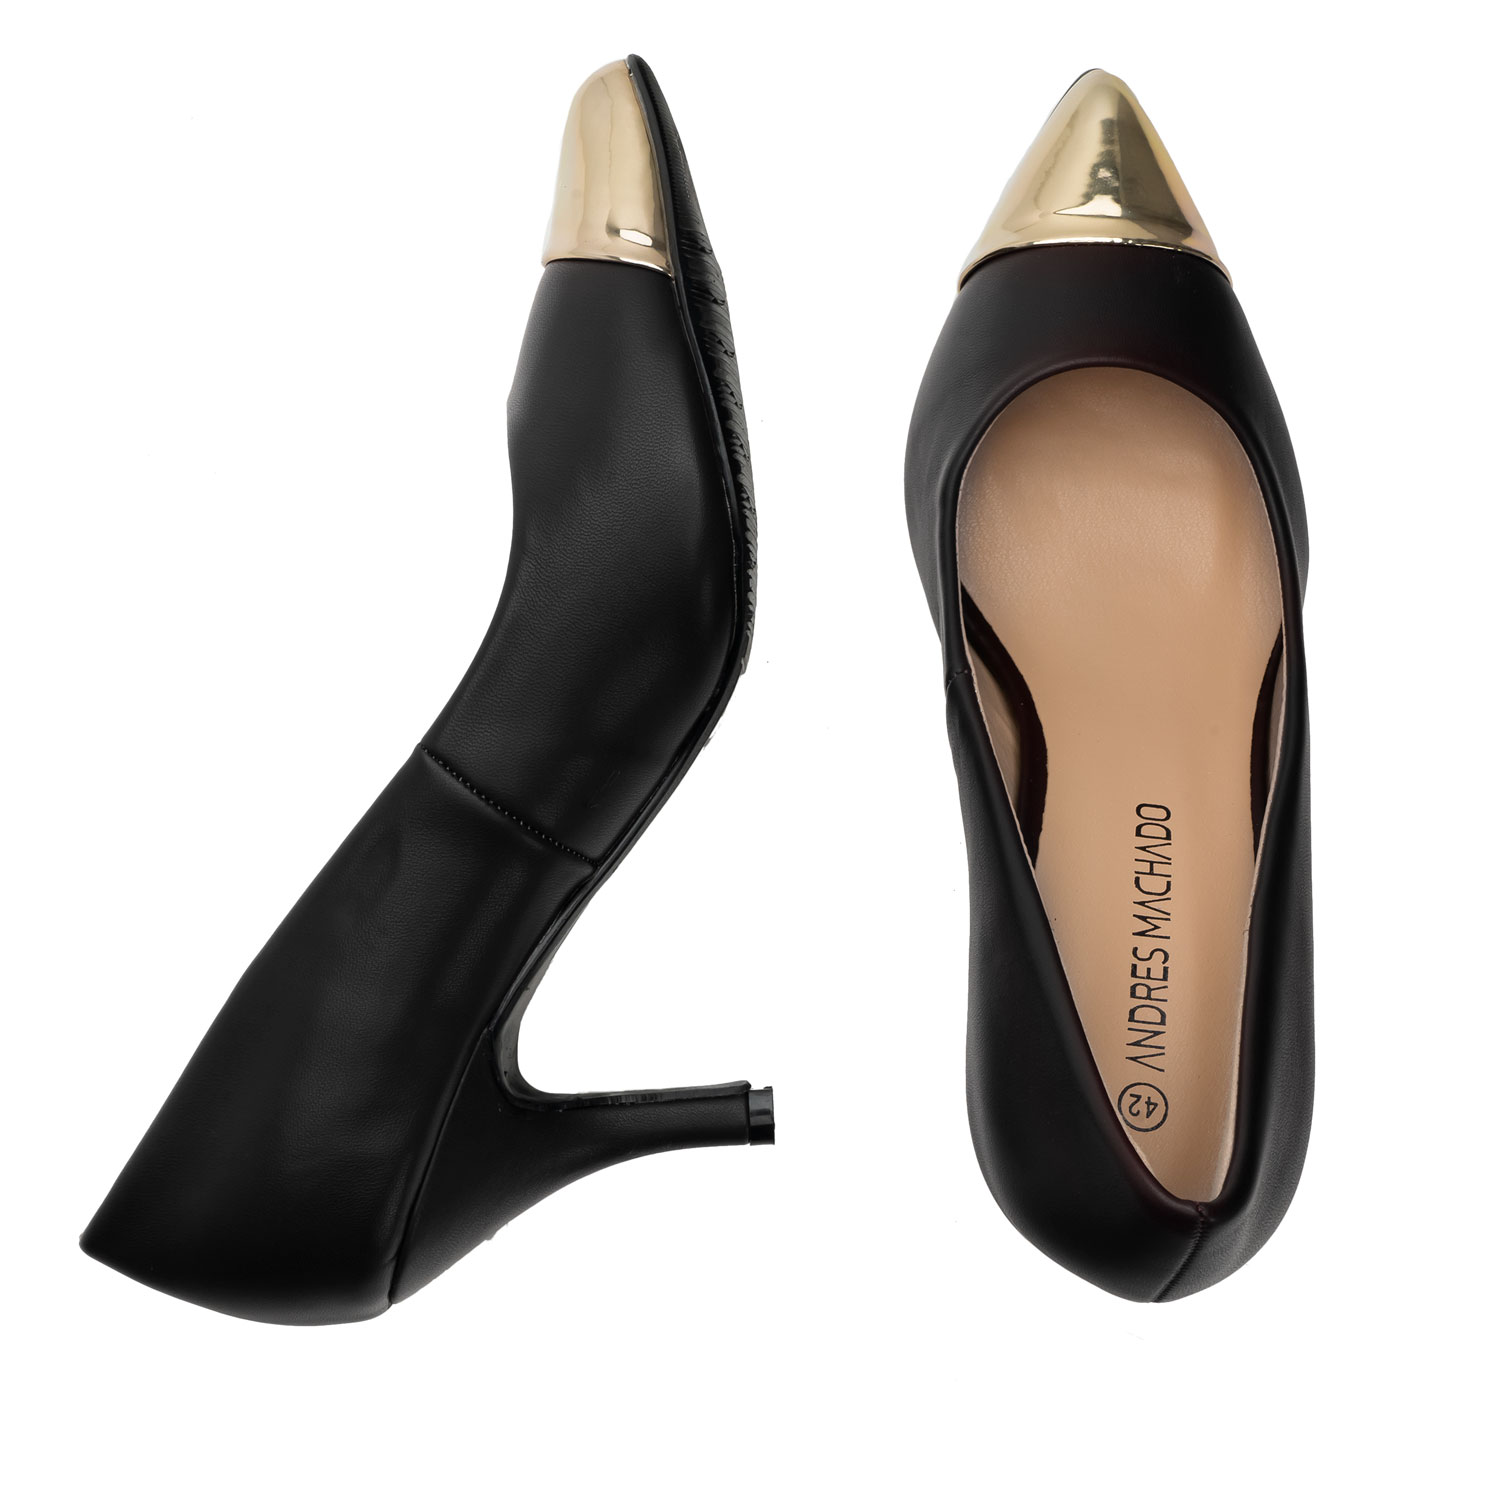 Stilettos in Black Soft leather with Golden Toe Cap 